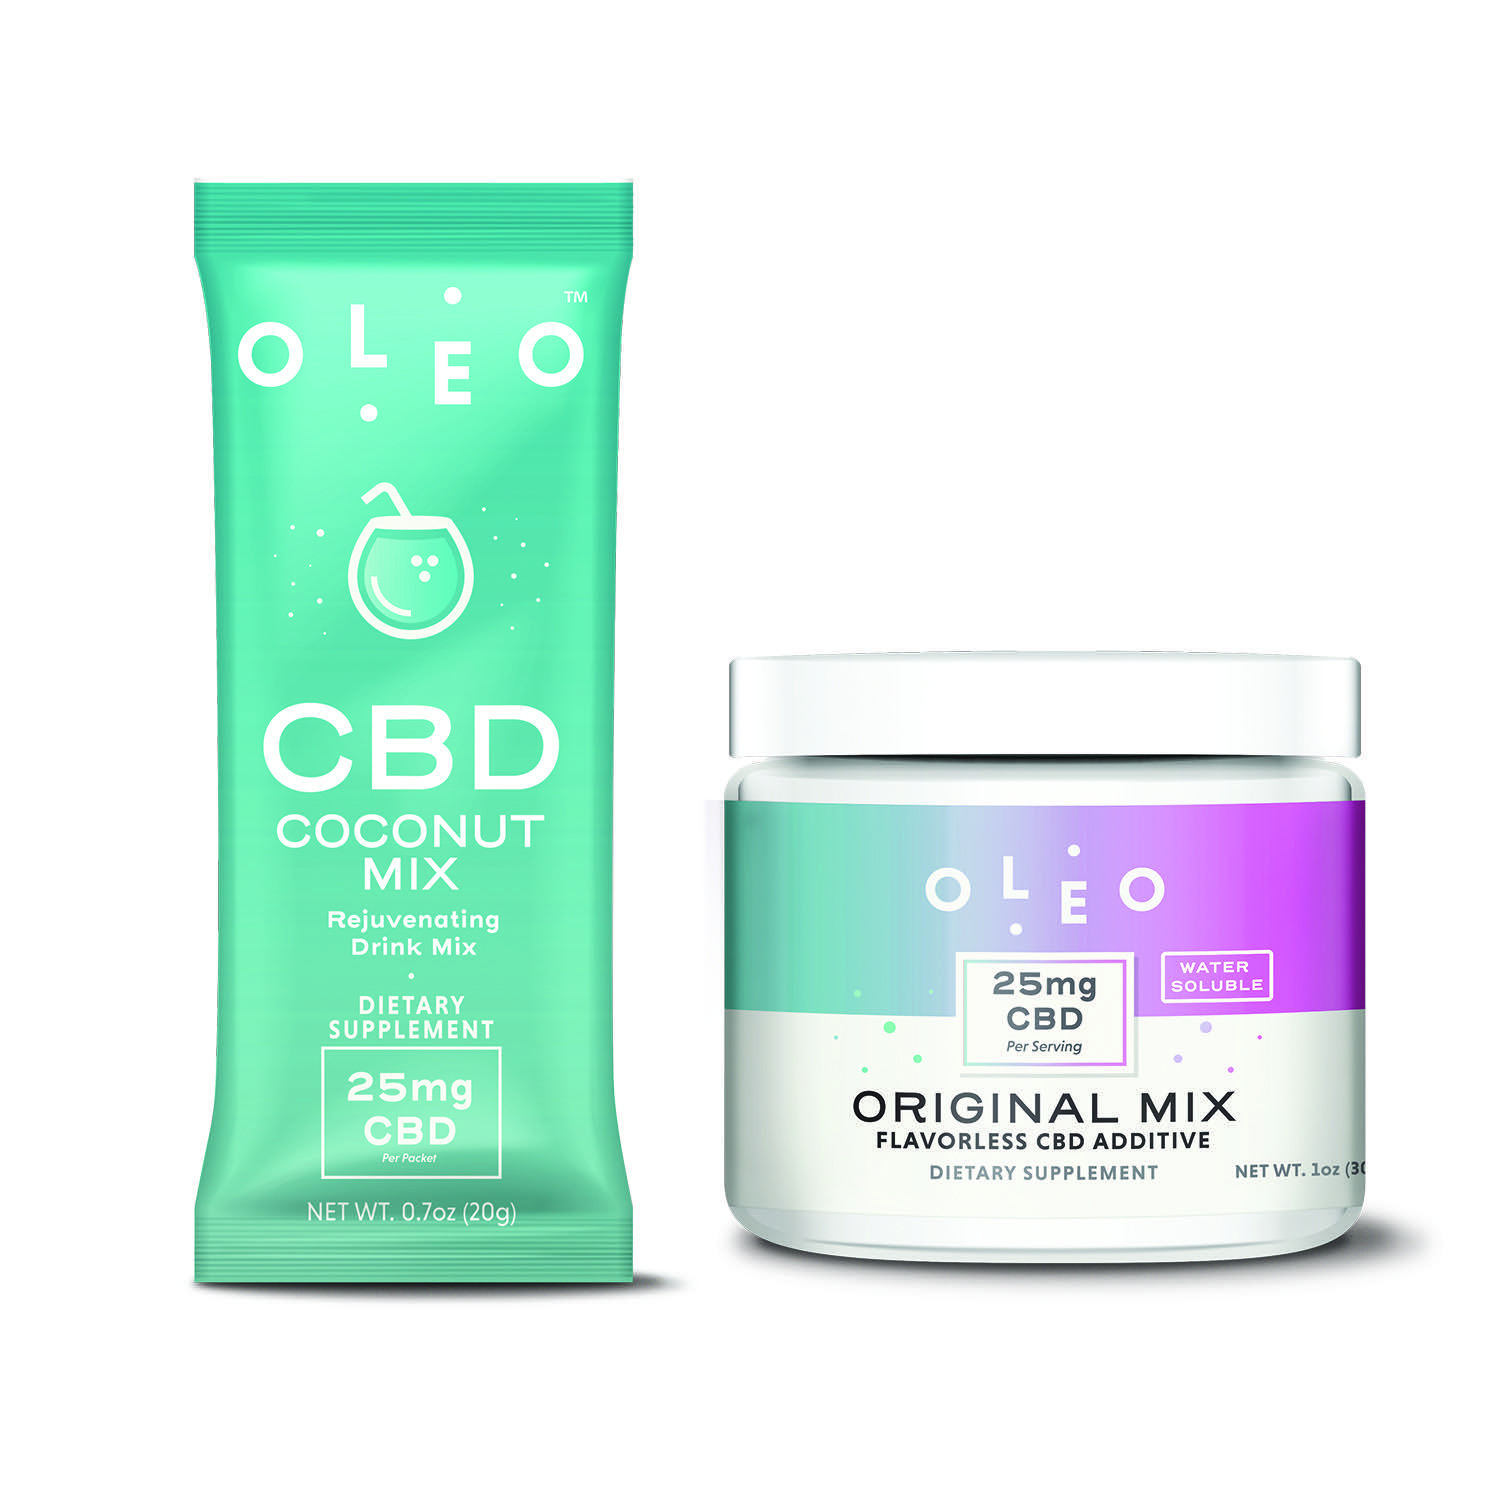 OLEO™ CBD Coconut Mix and flavorless Original Mix, designed for post-workout recovery.